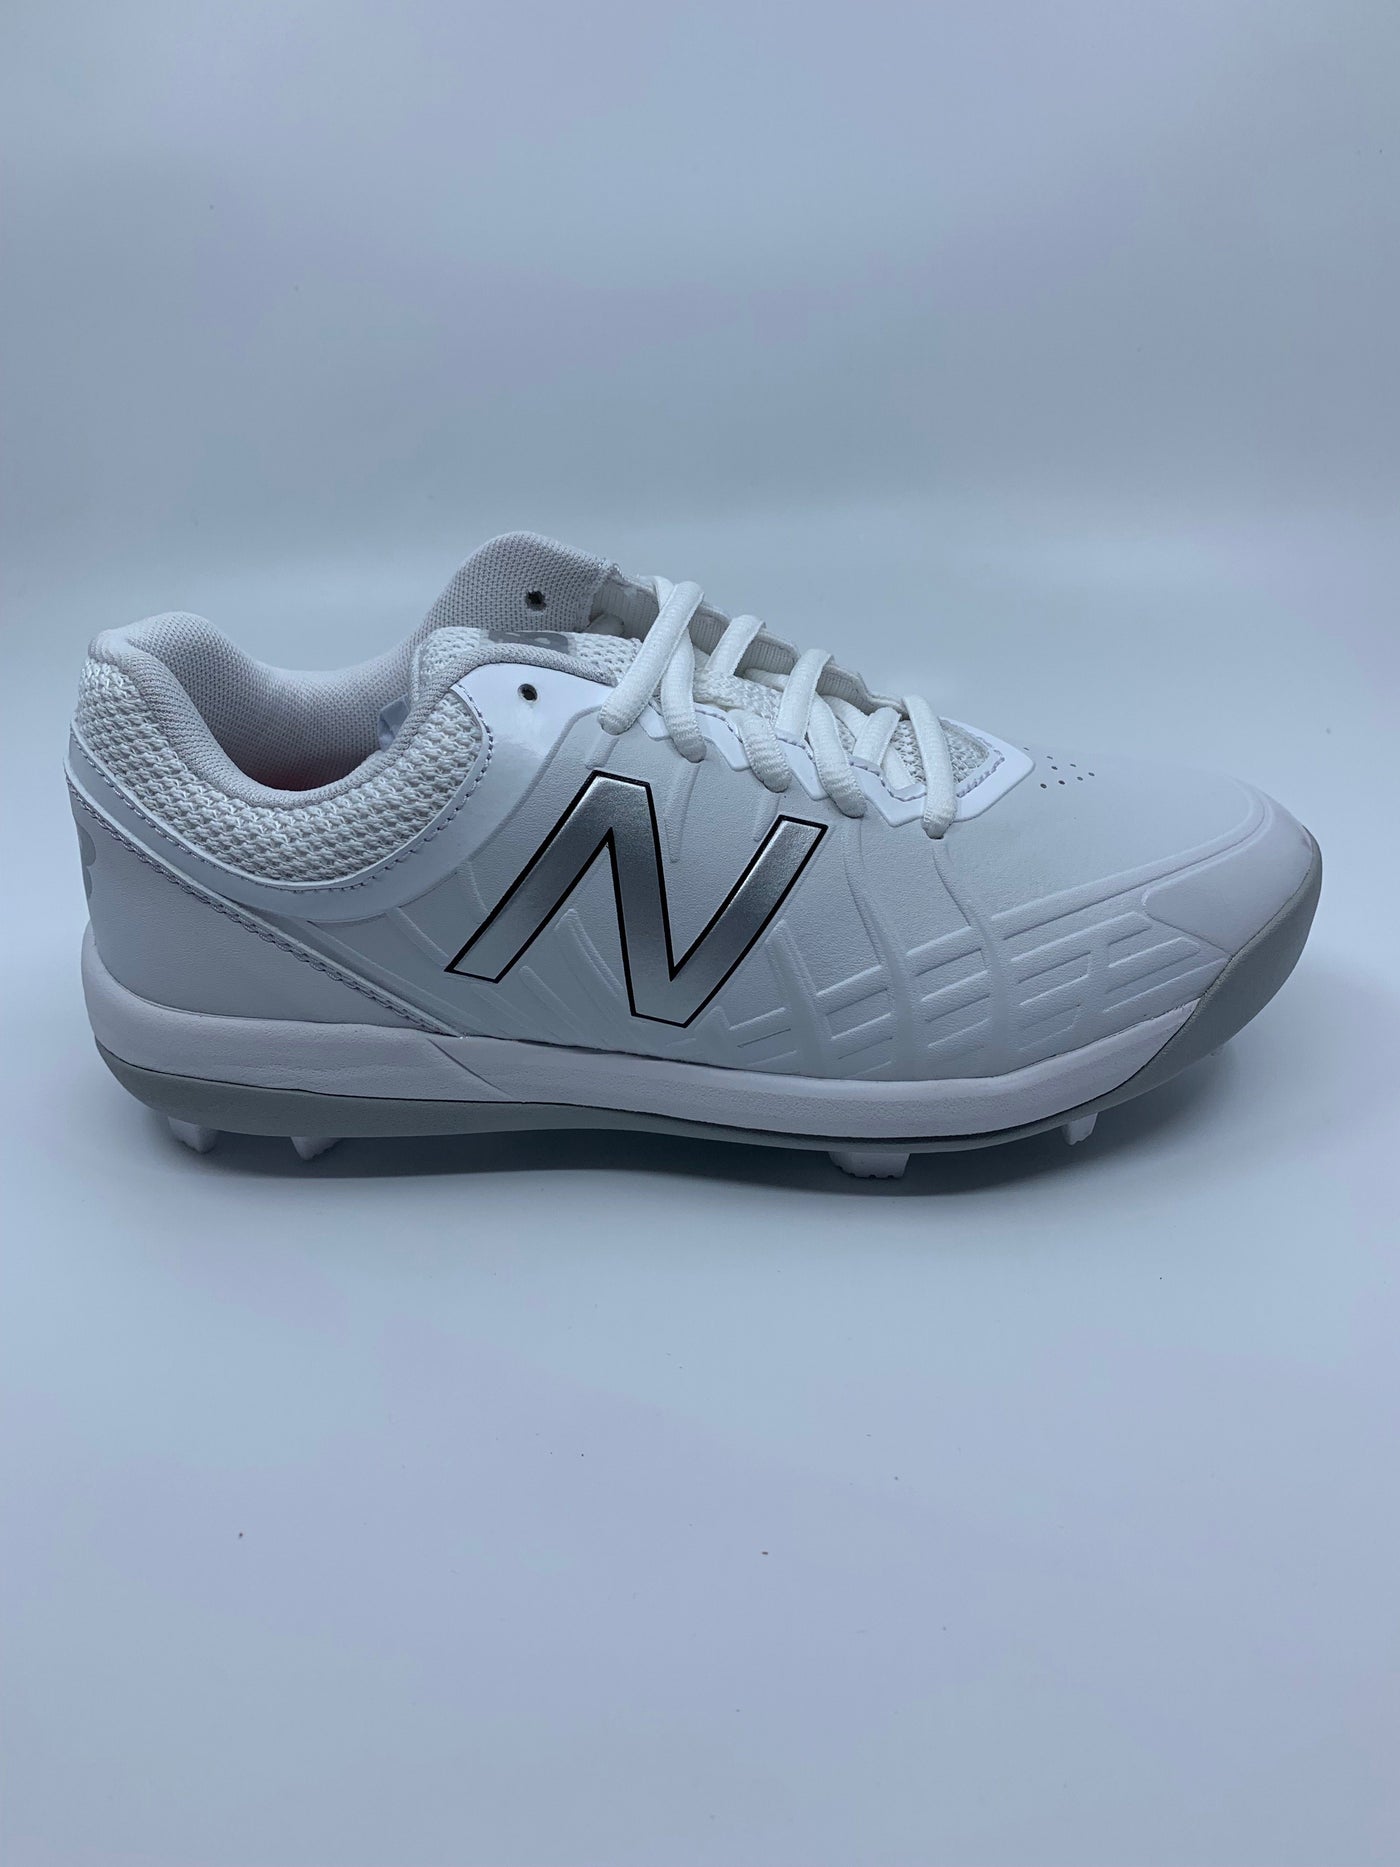 New Balance Youth Molded Junior Cleats 